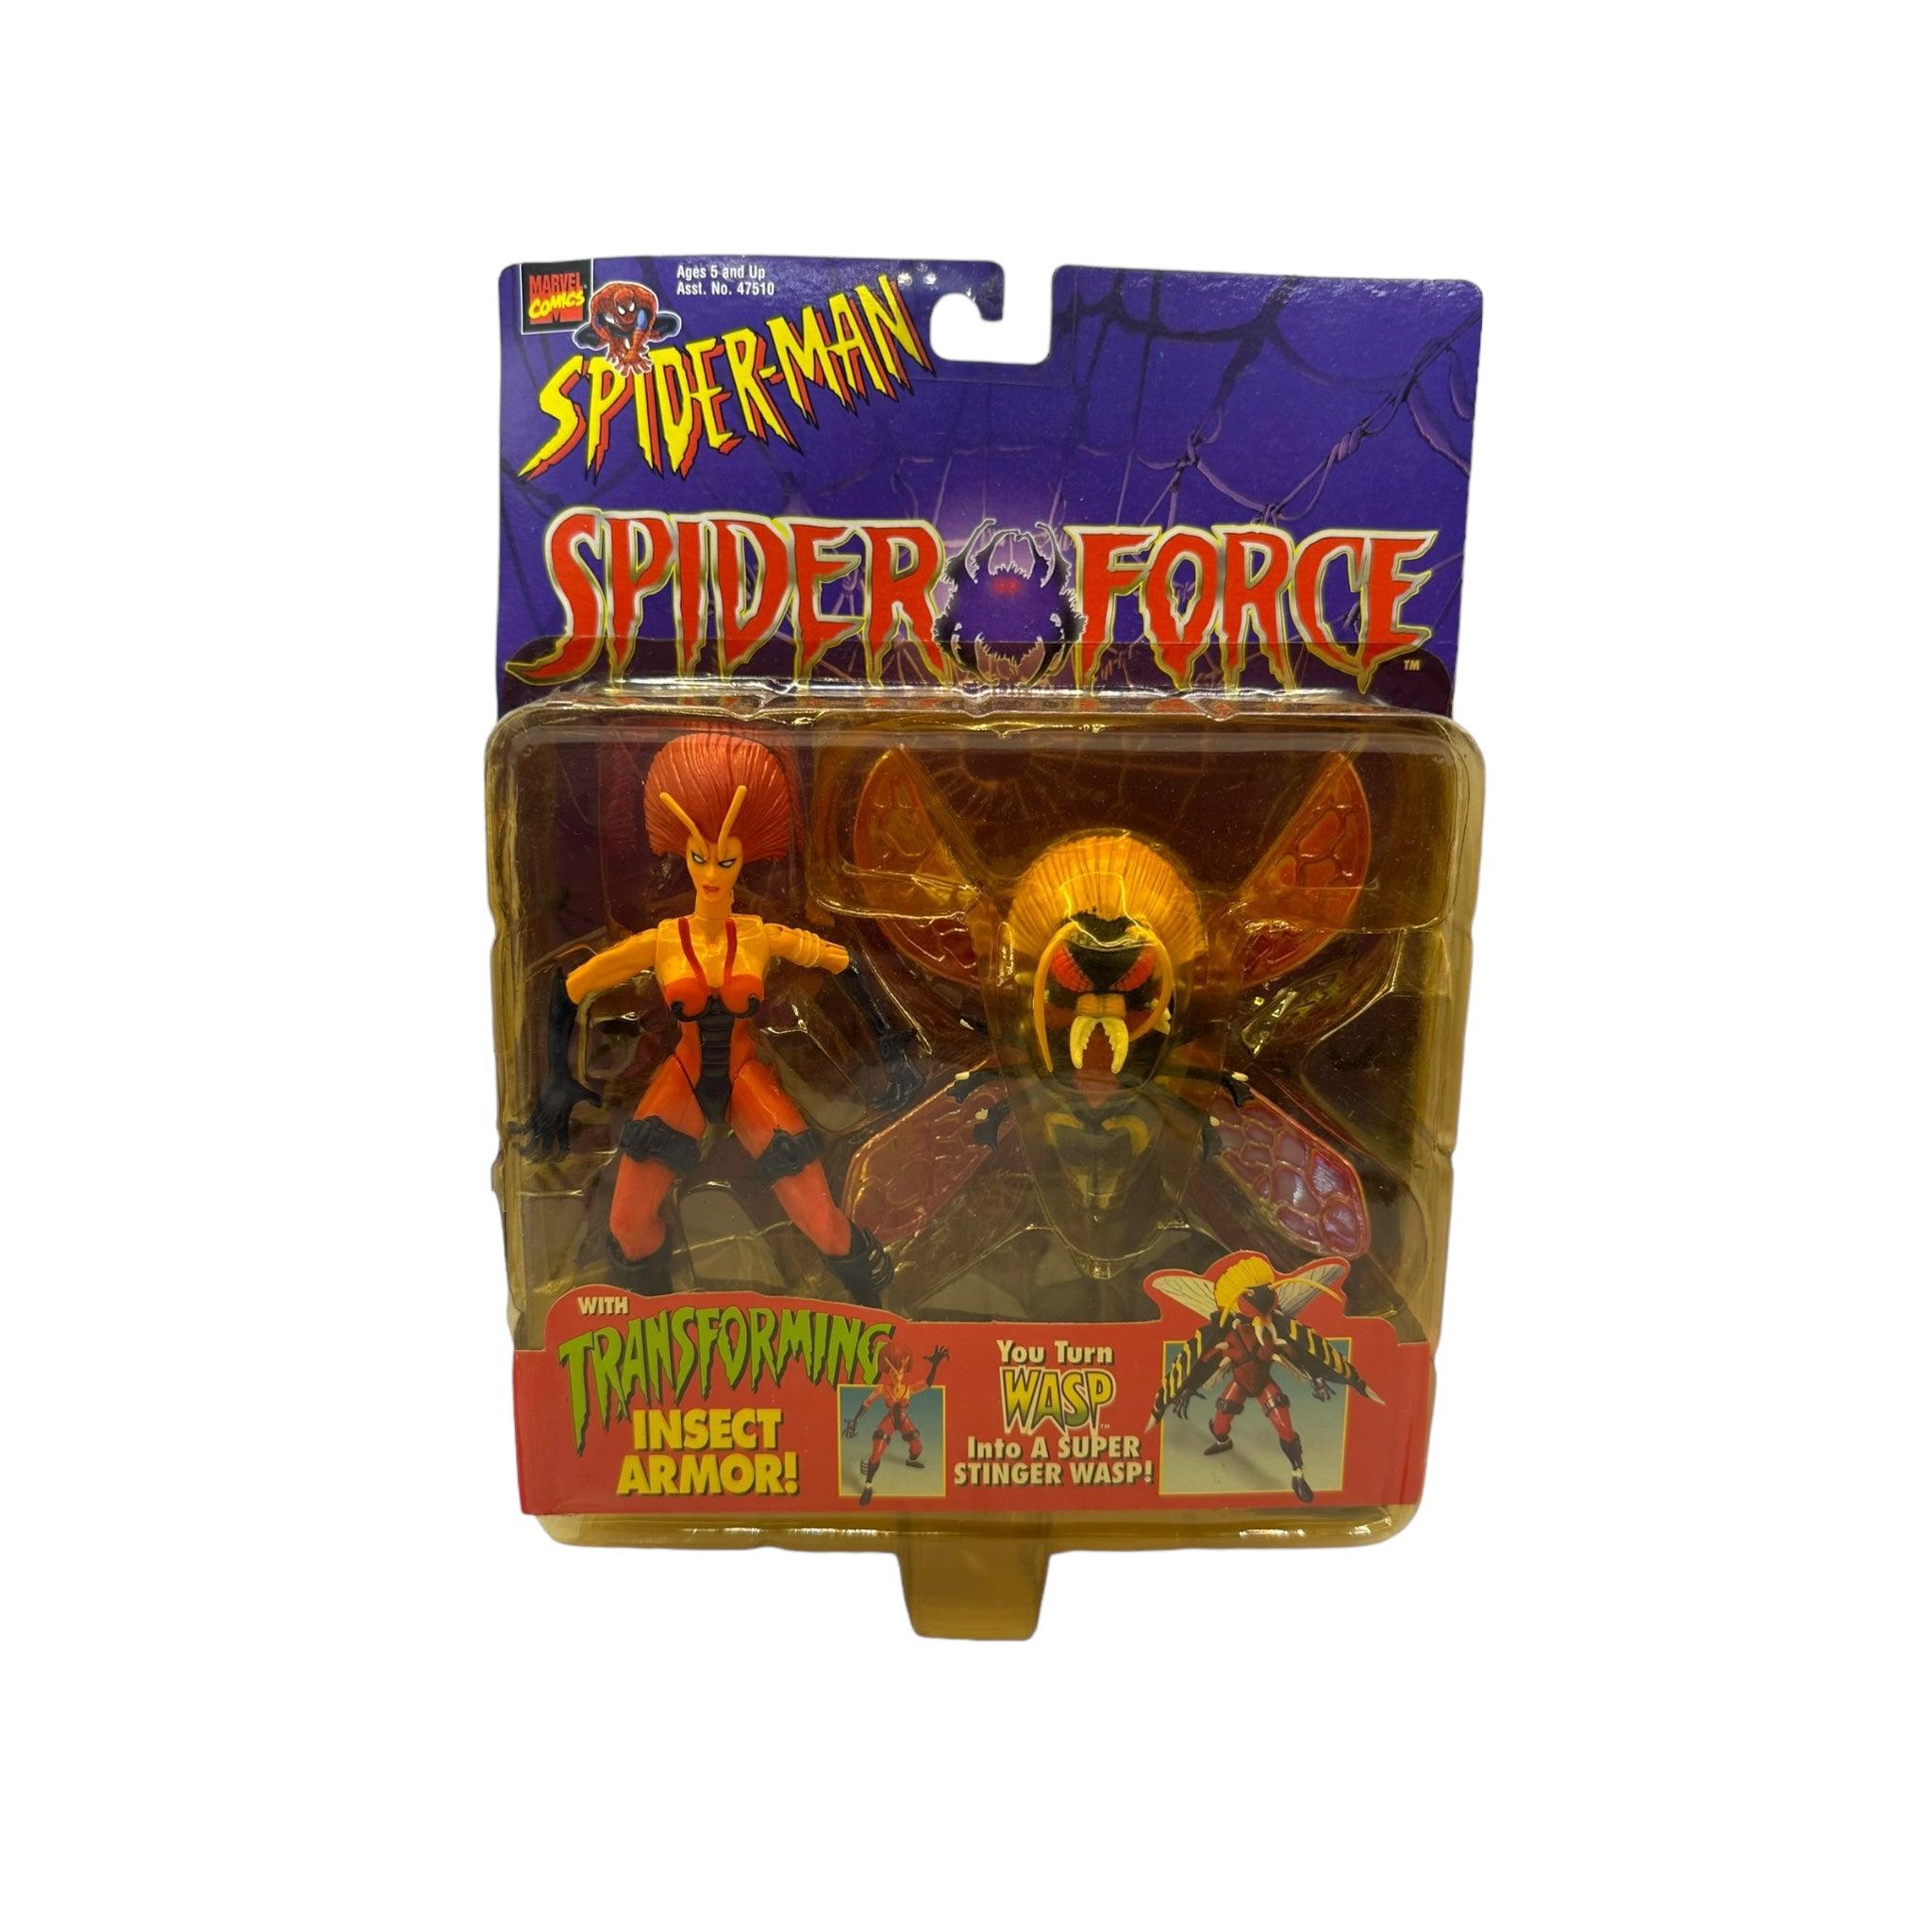 1997 TOYBIZ SPIDER-MAN SPIDER FORCE WASP AF (CRACKED/YELLOW BUBBLE) - Kings Comics